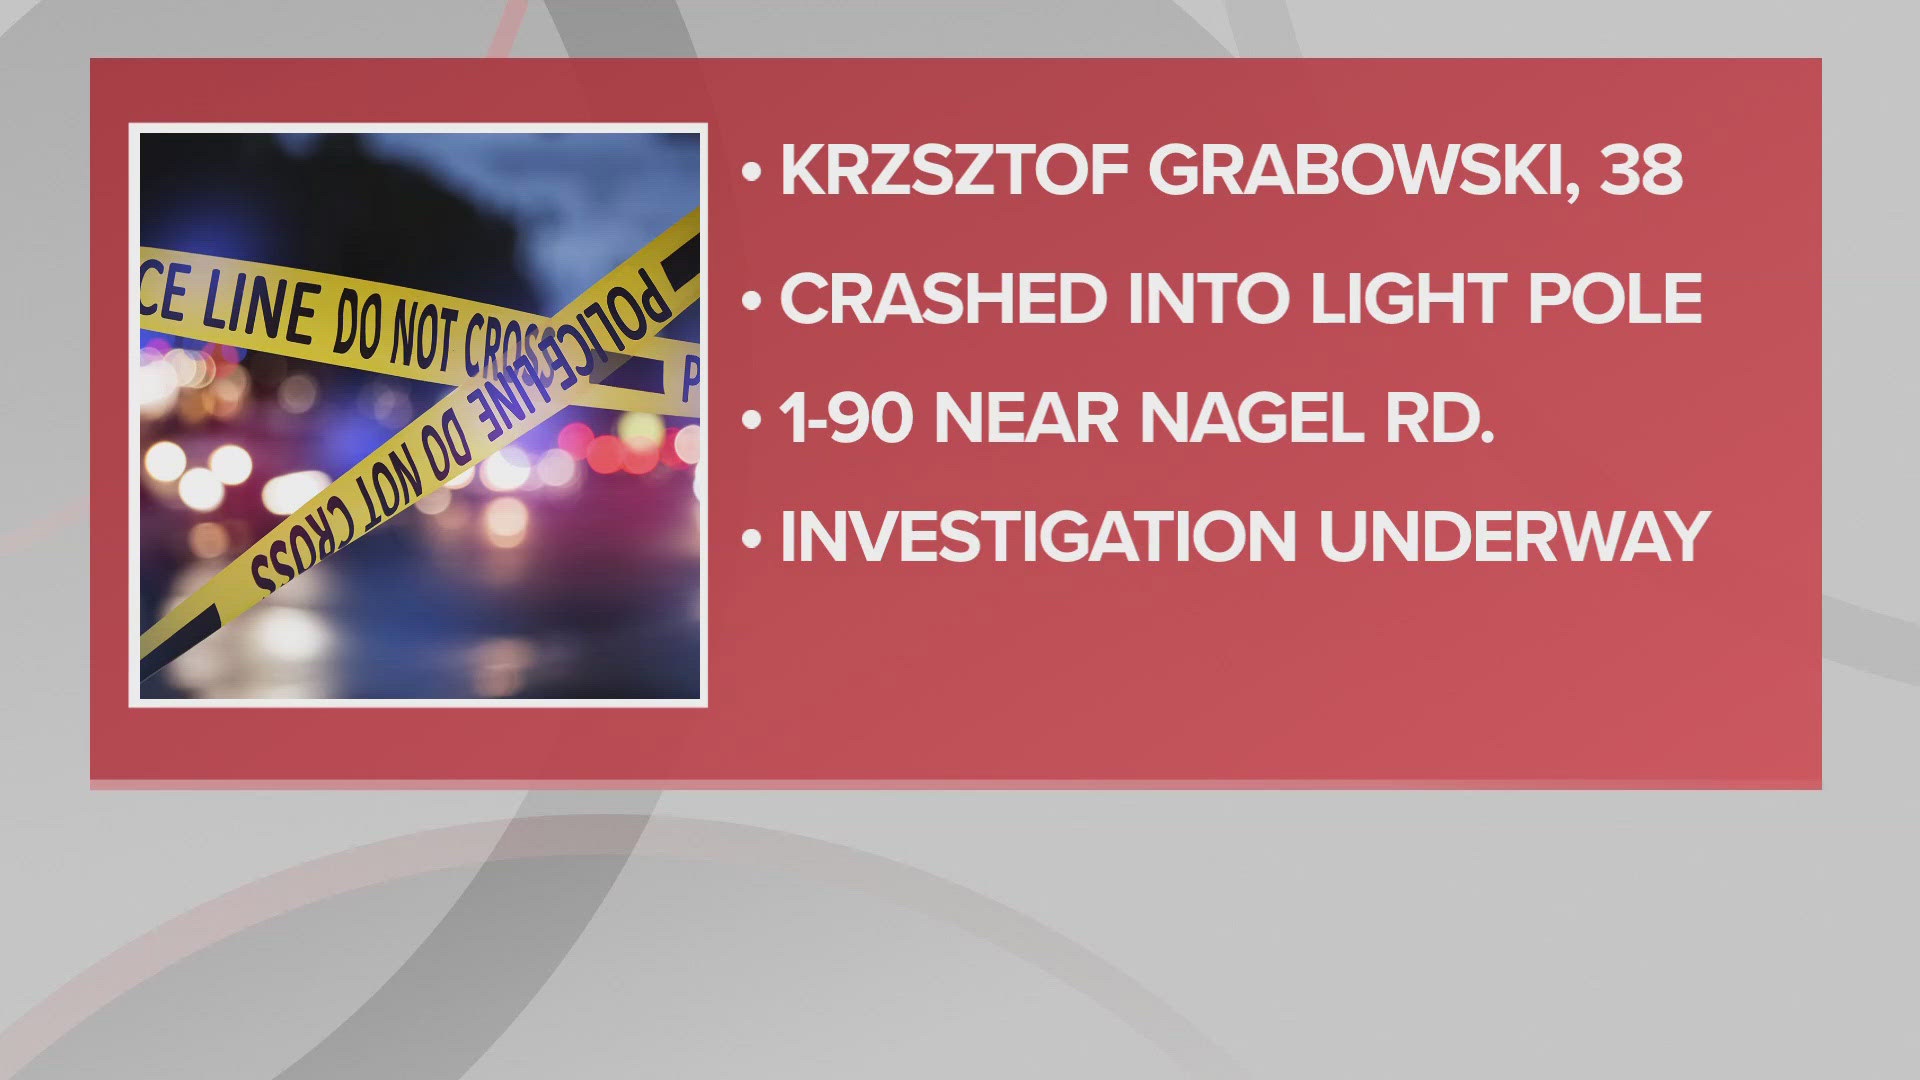 38-year-old Krzsztof Grabowski of Gates Mills was pronounced dead at the scene.